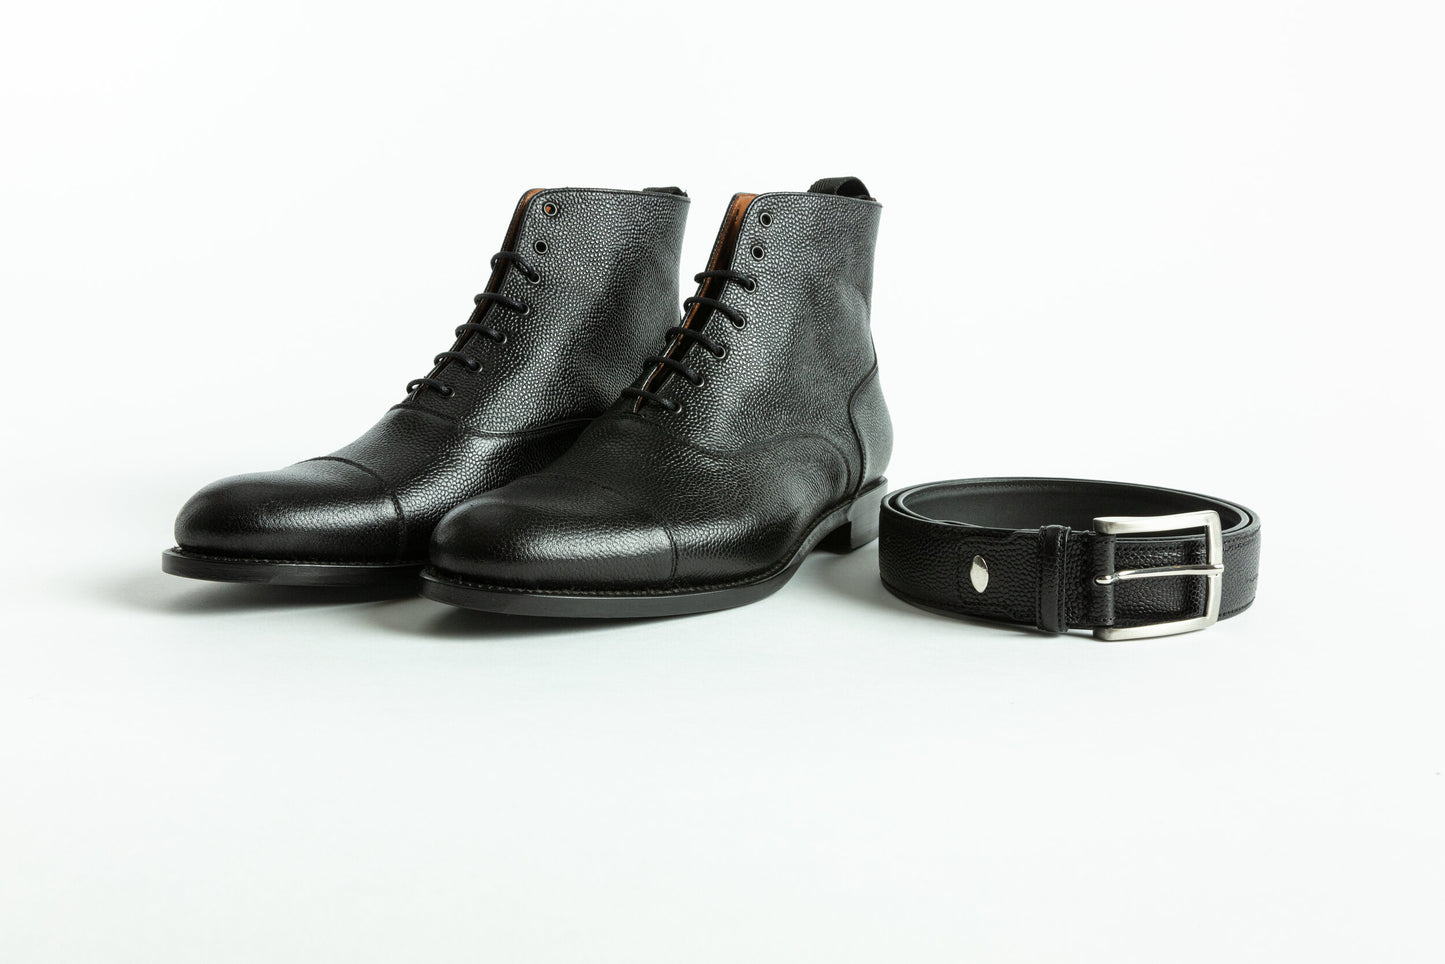 The James Boot in Black with Matching Belt